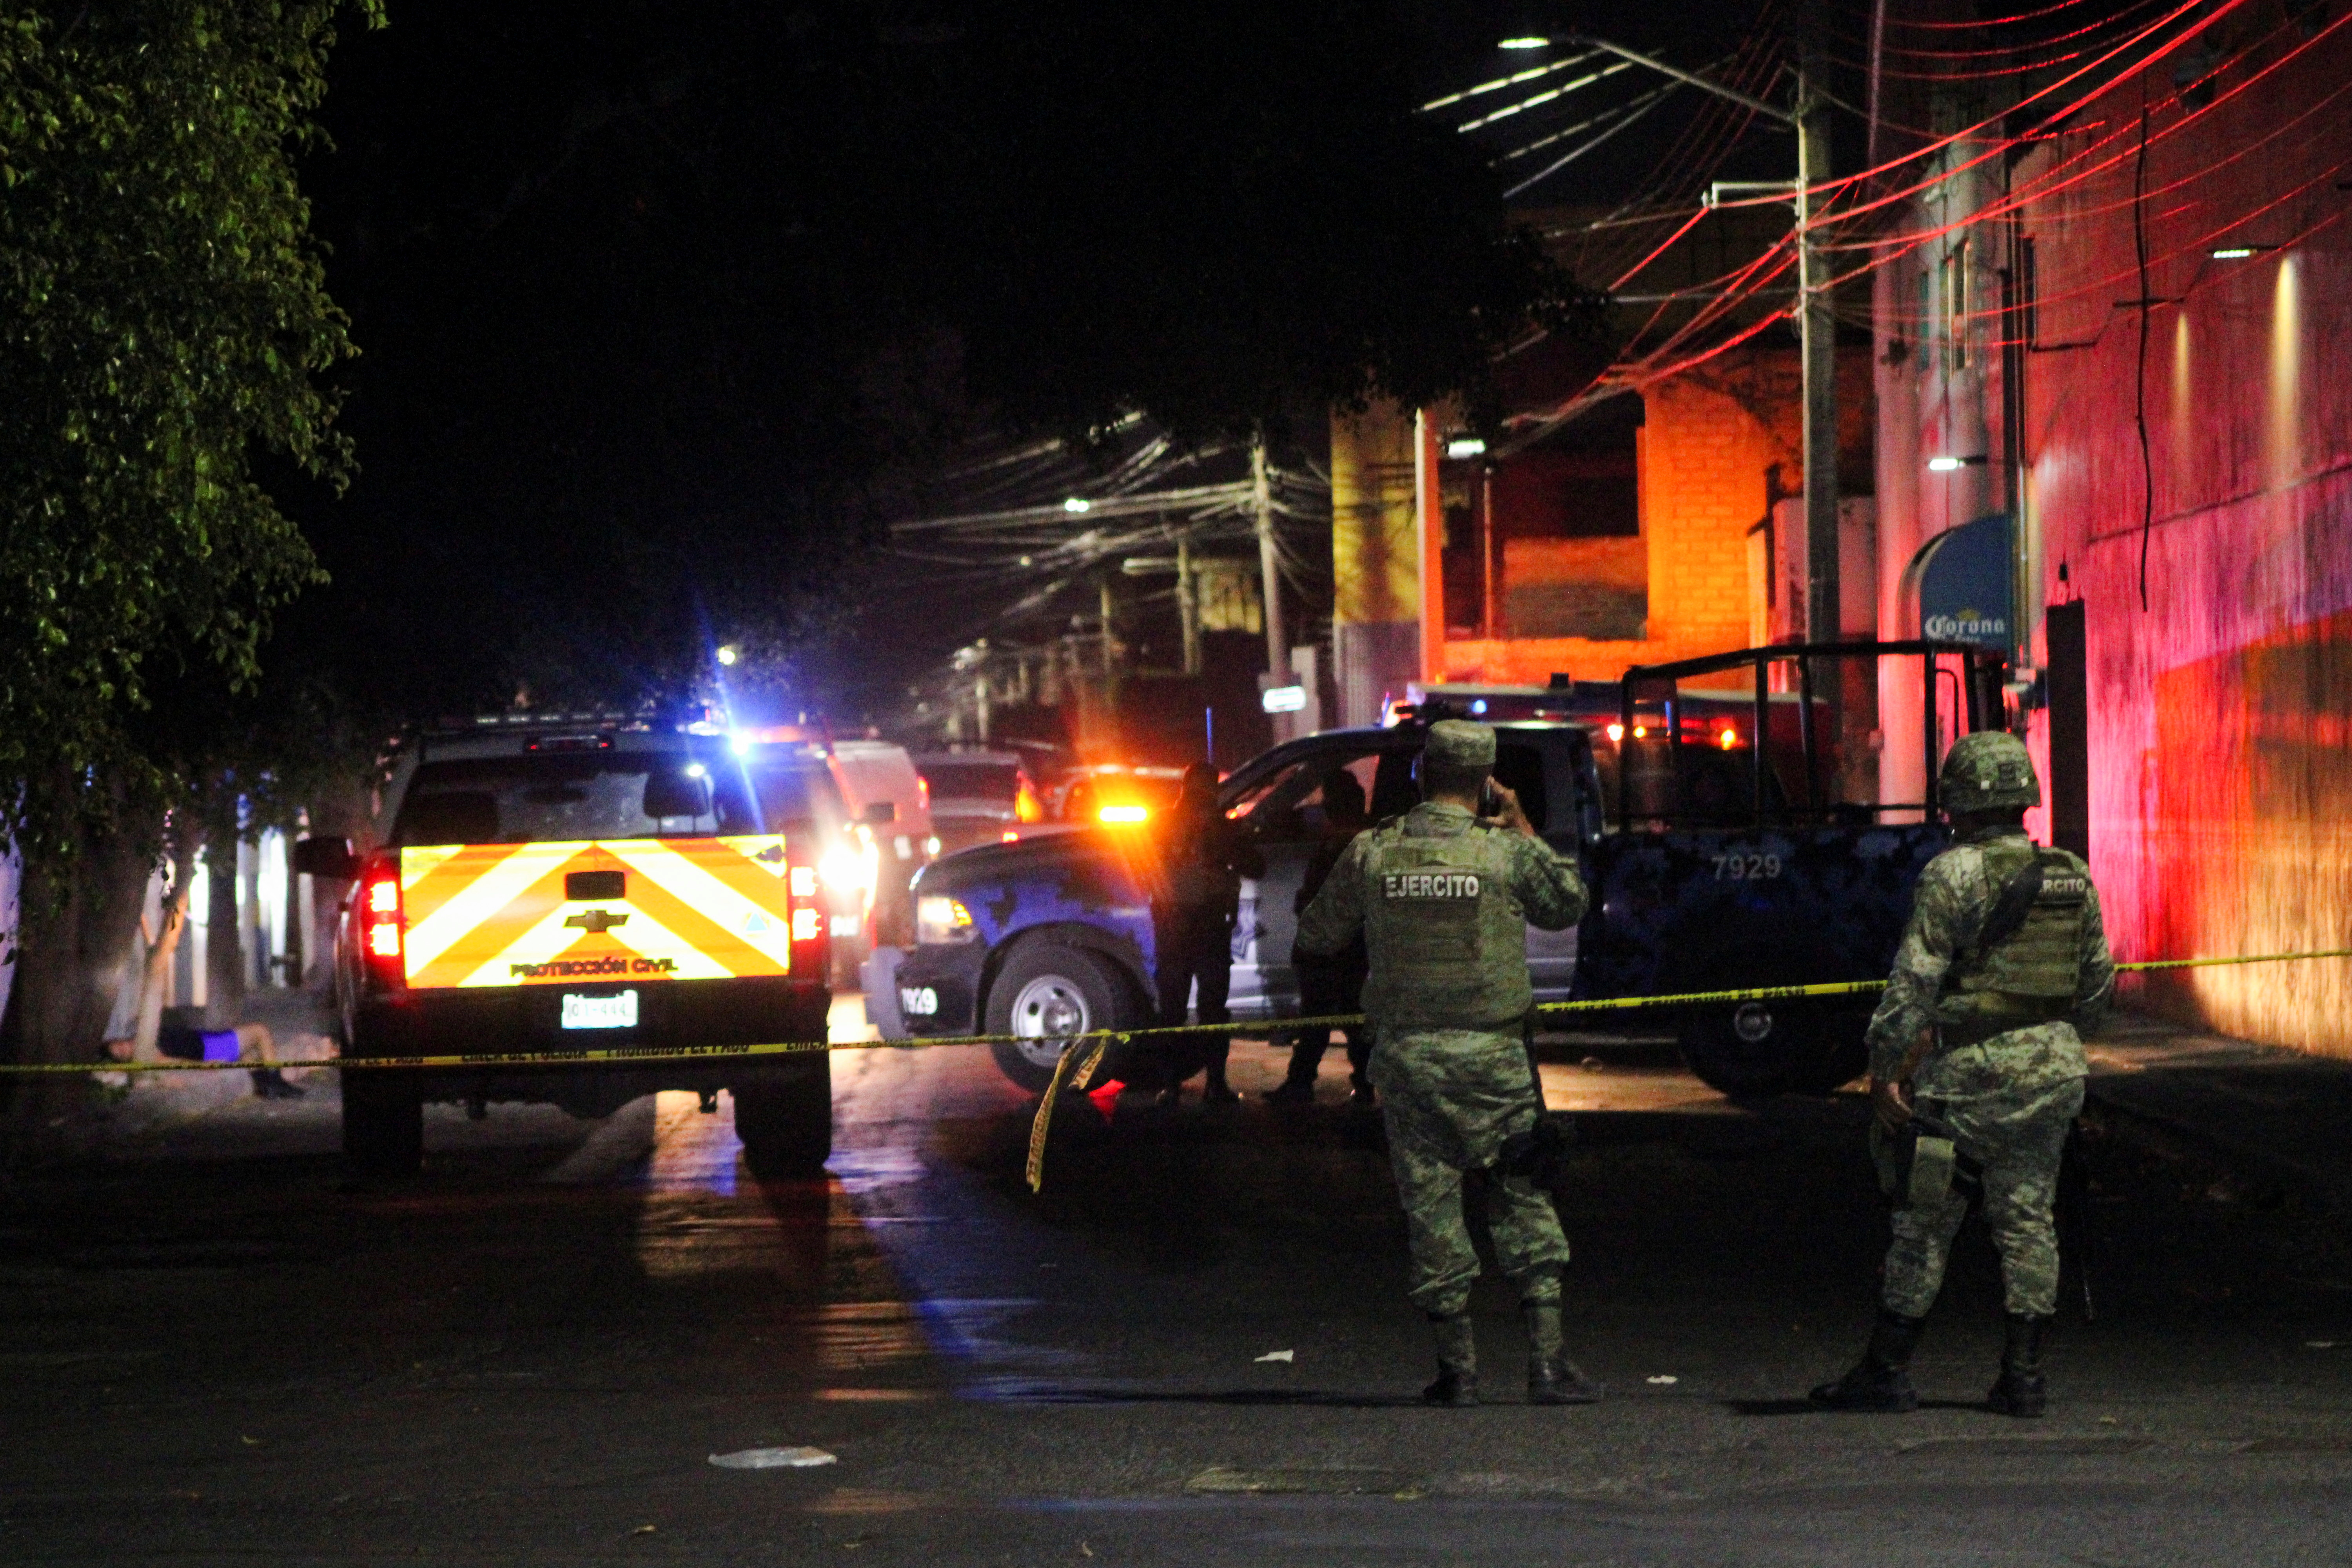 Security forces guard at the scene where gunmen attacked bars and killed people, in Celaya